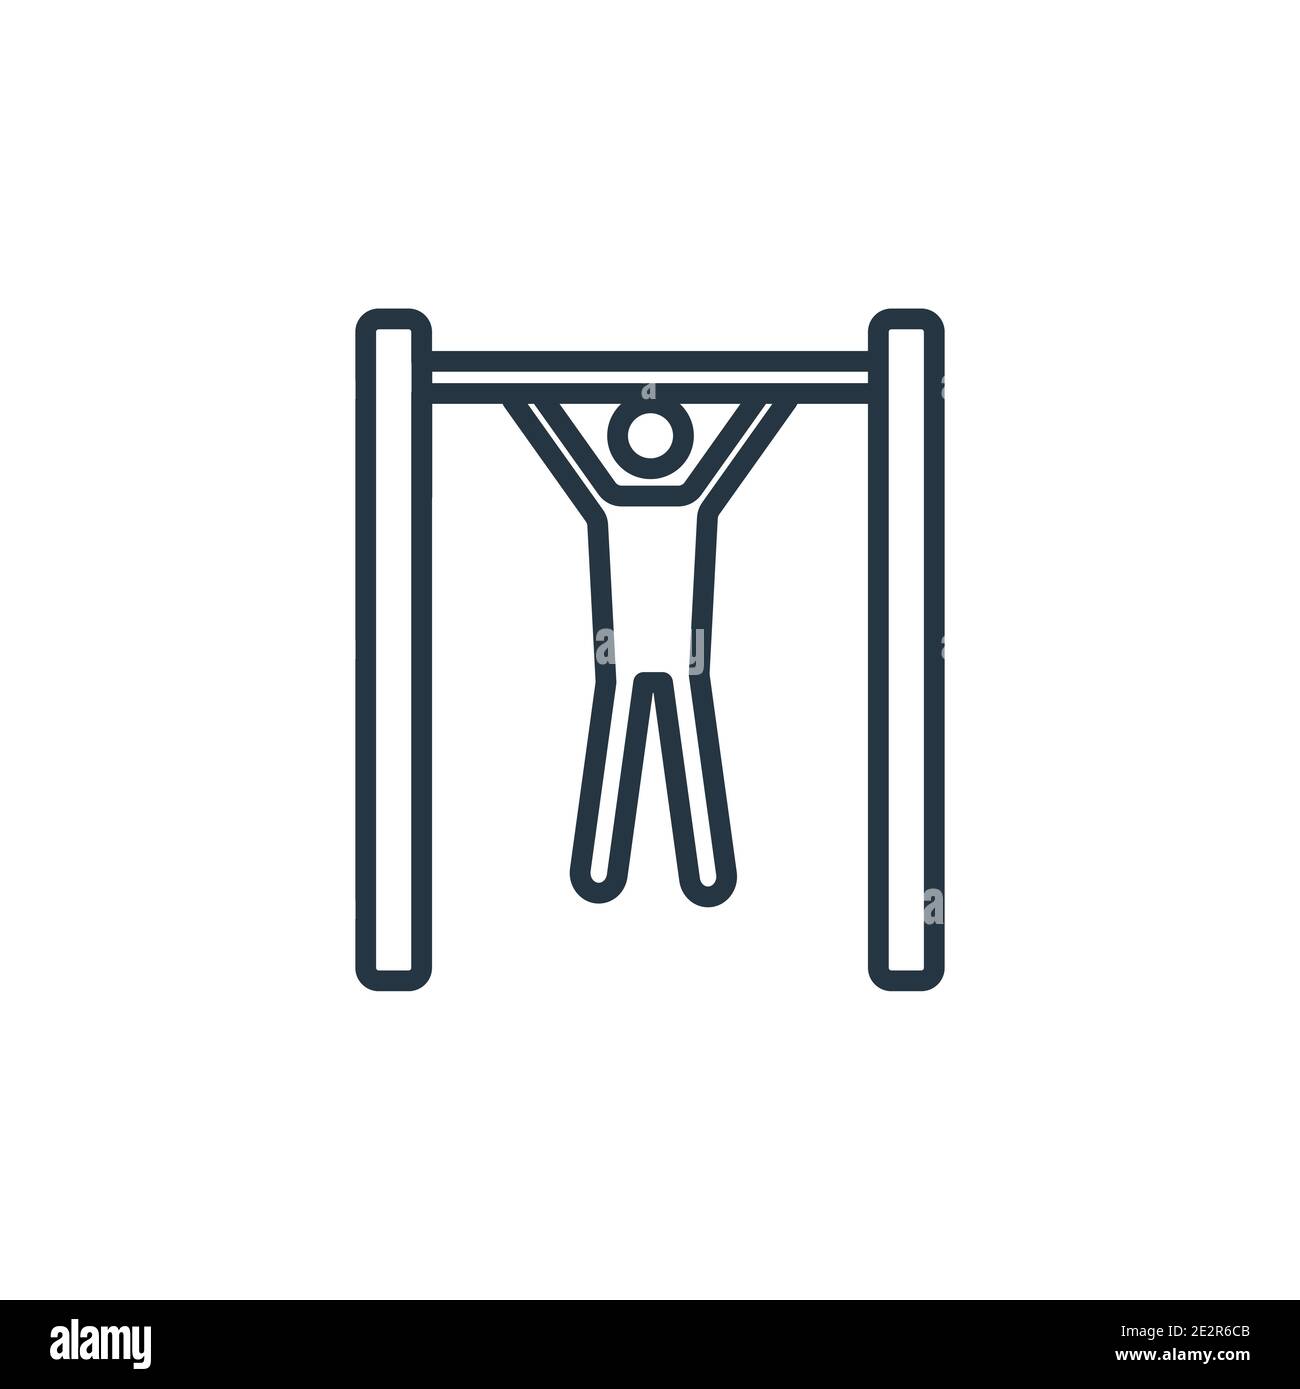 Pull up outline vector icon. Thin line black pull up icon, flat vector ...